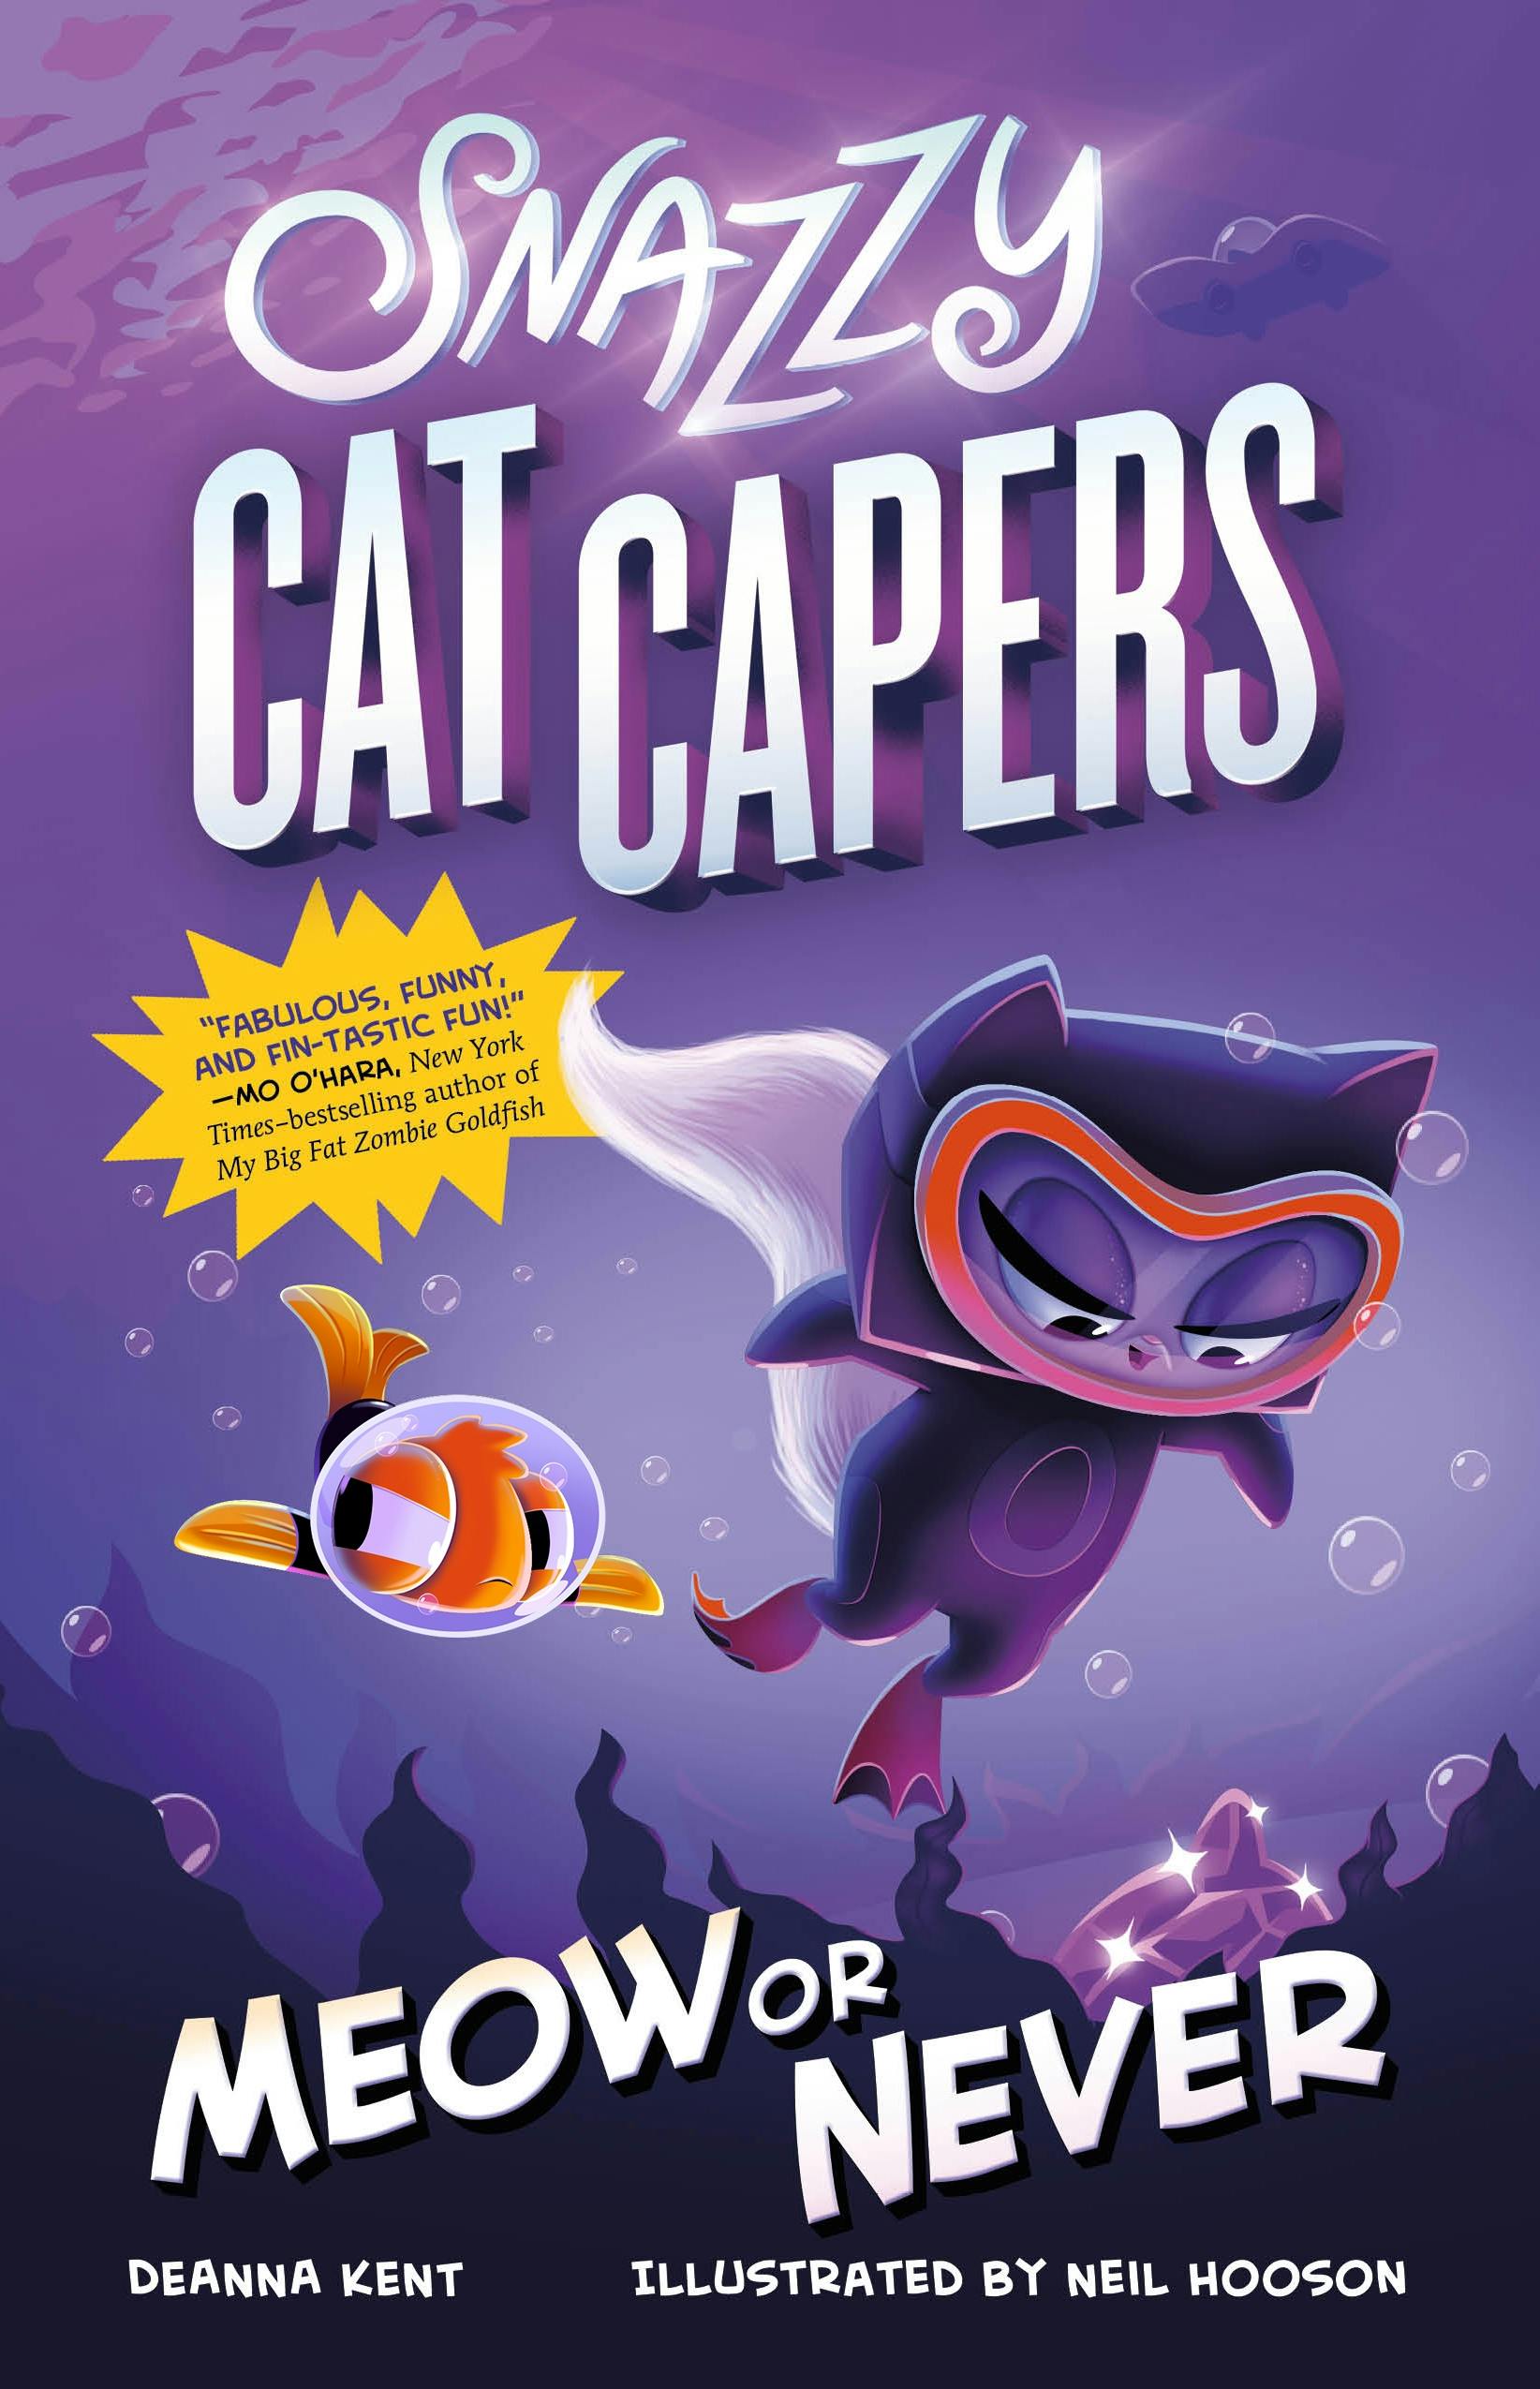 Image of Snazzy Cat Capers: Meow or Never